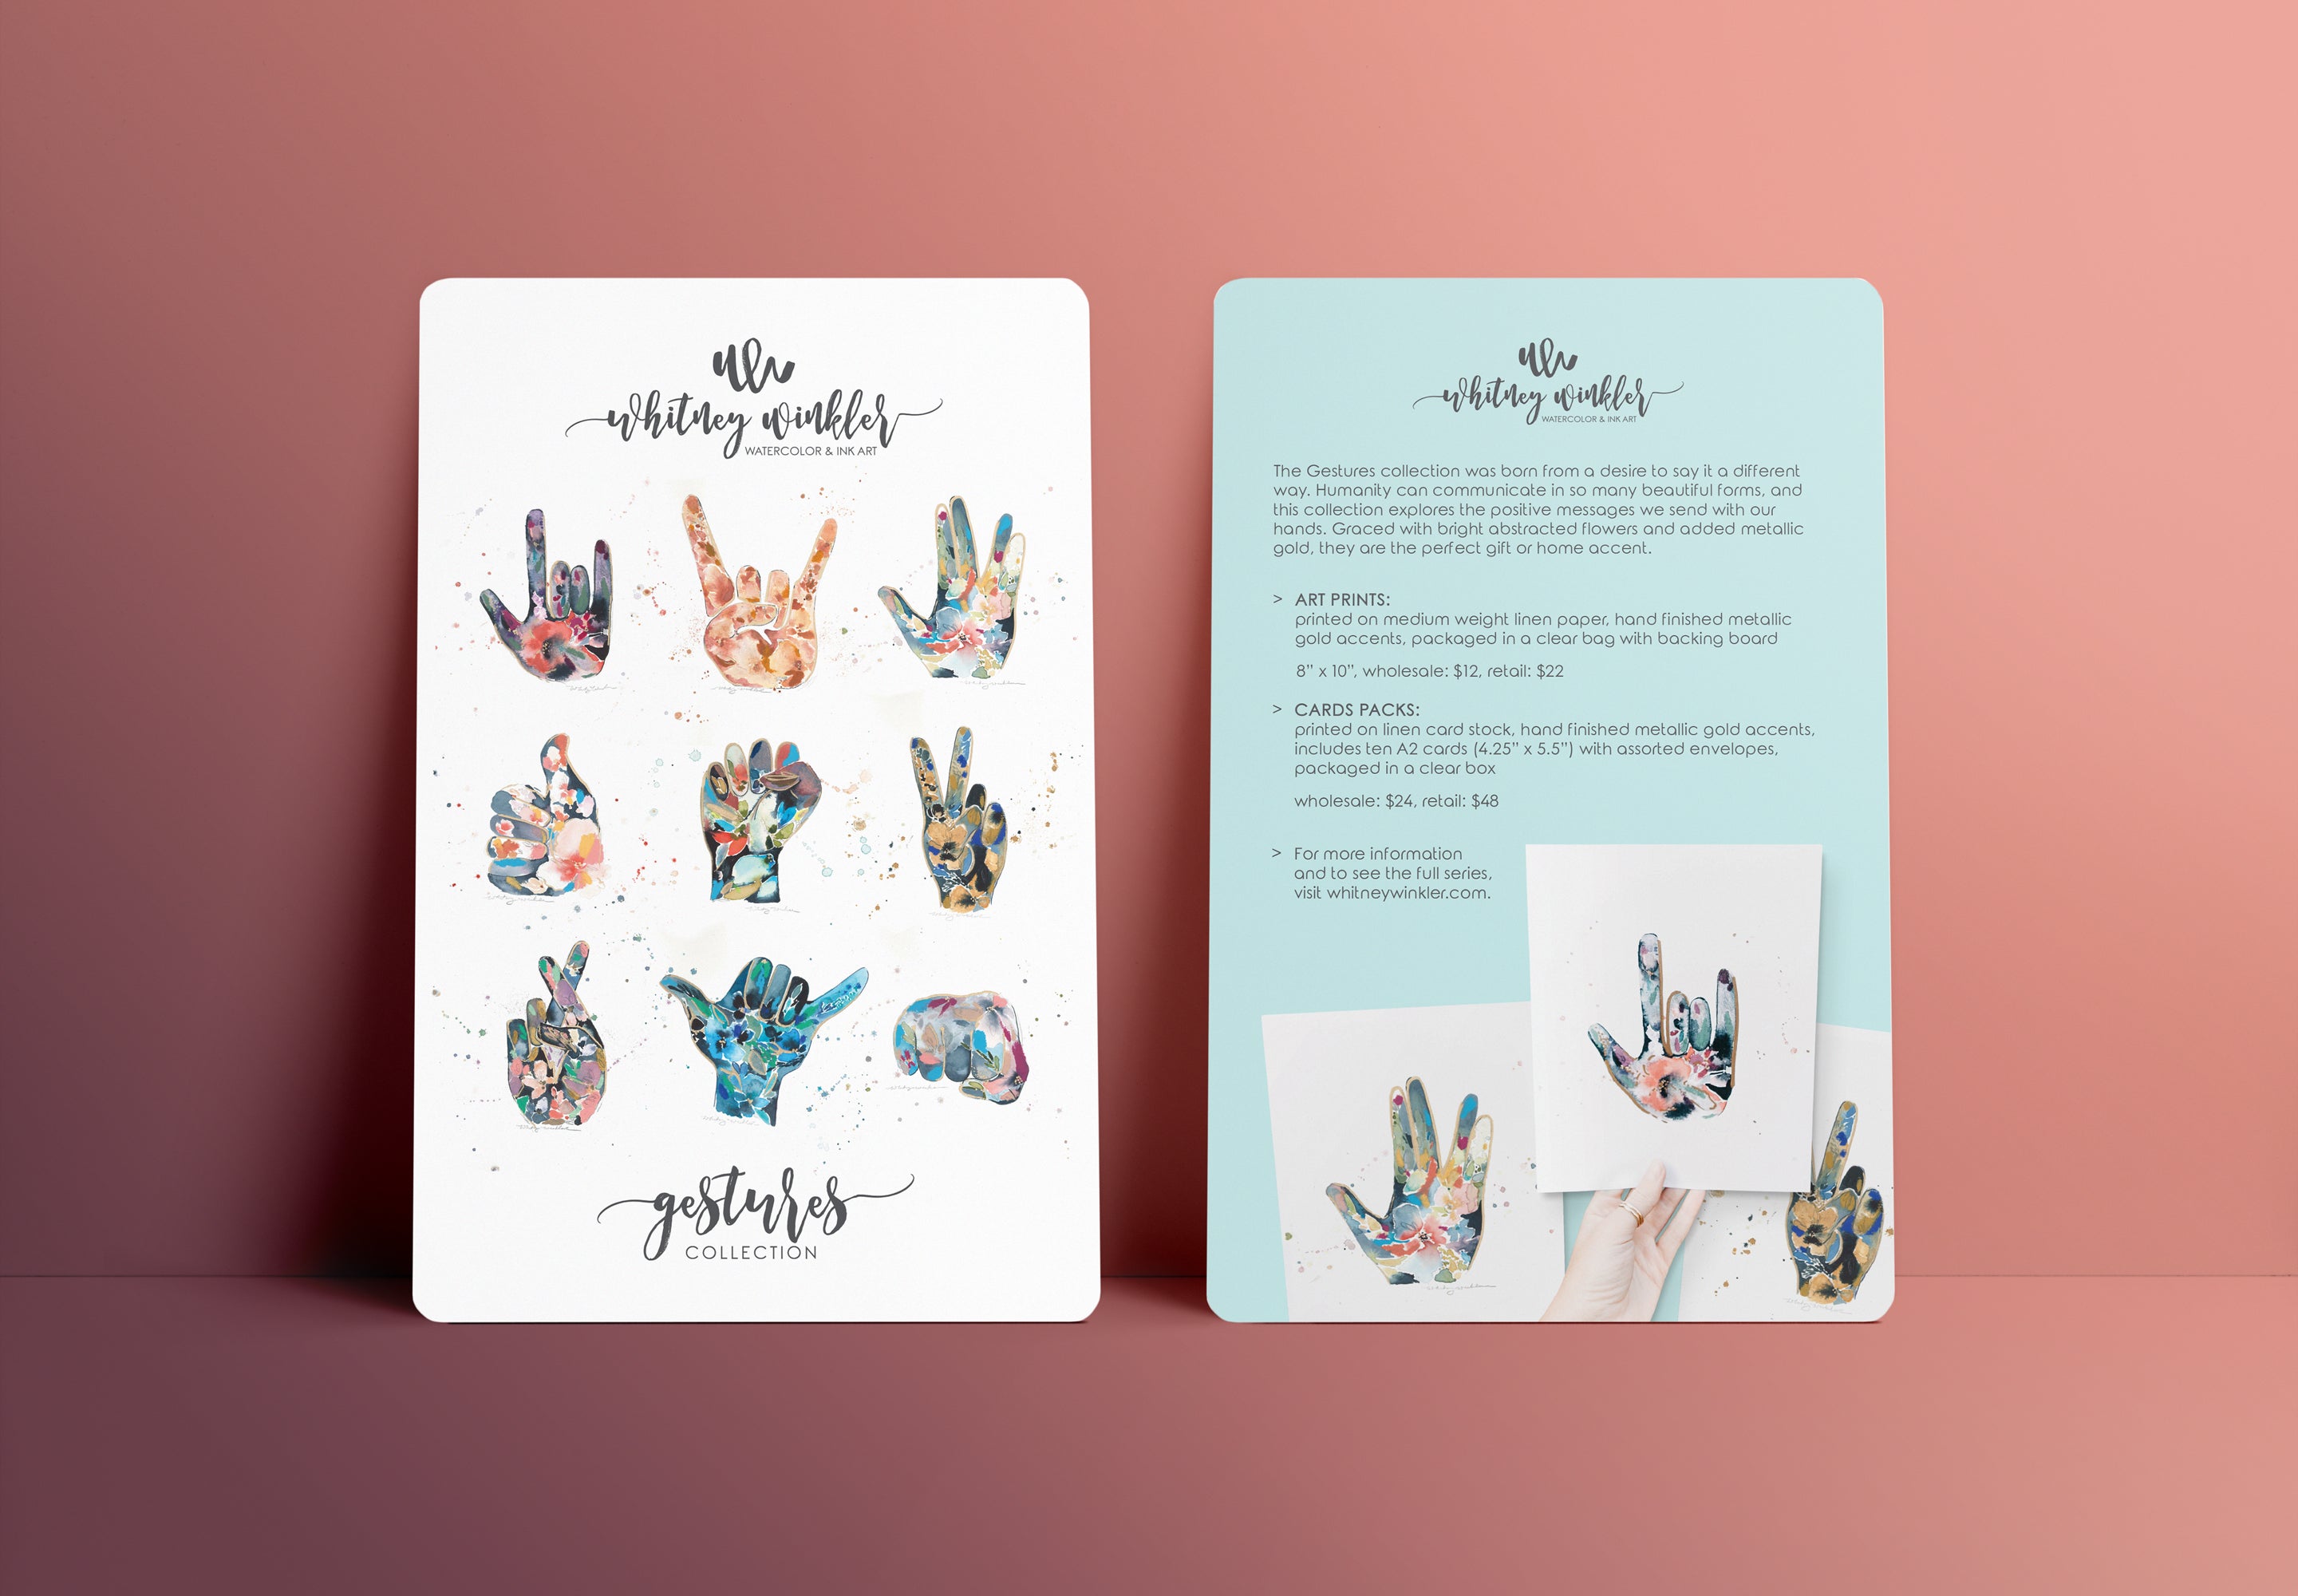 Hand gestures watercolor paintings, wholesale collection postcard design, Whitney Winkler